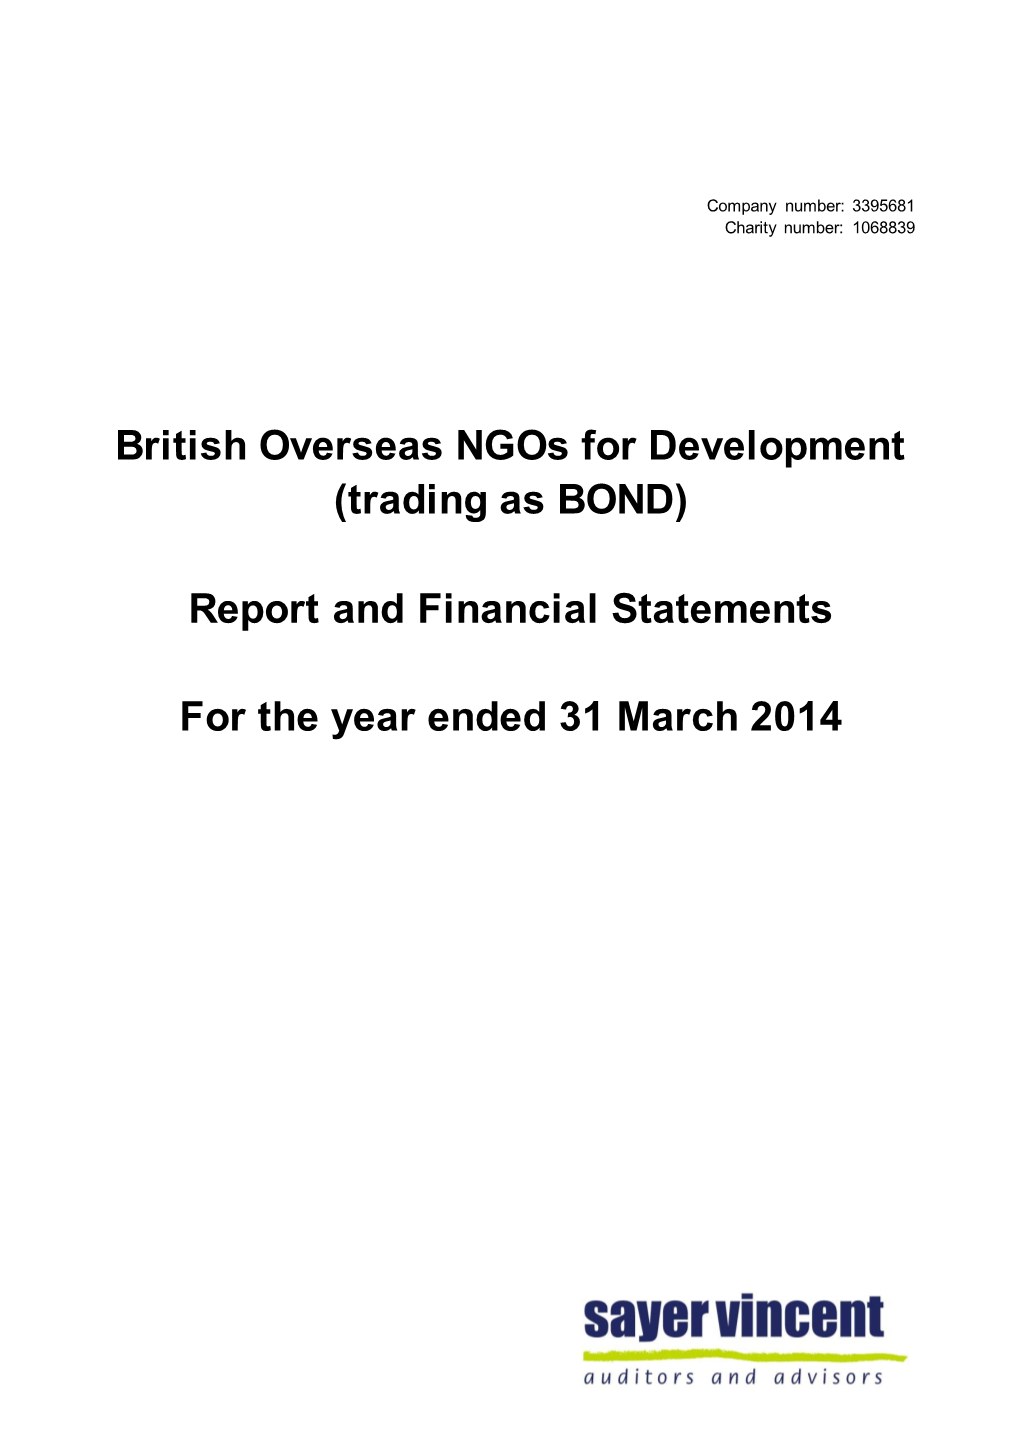 Bond Report and Financial Statements 2014